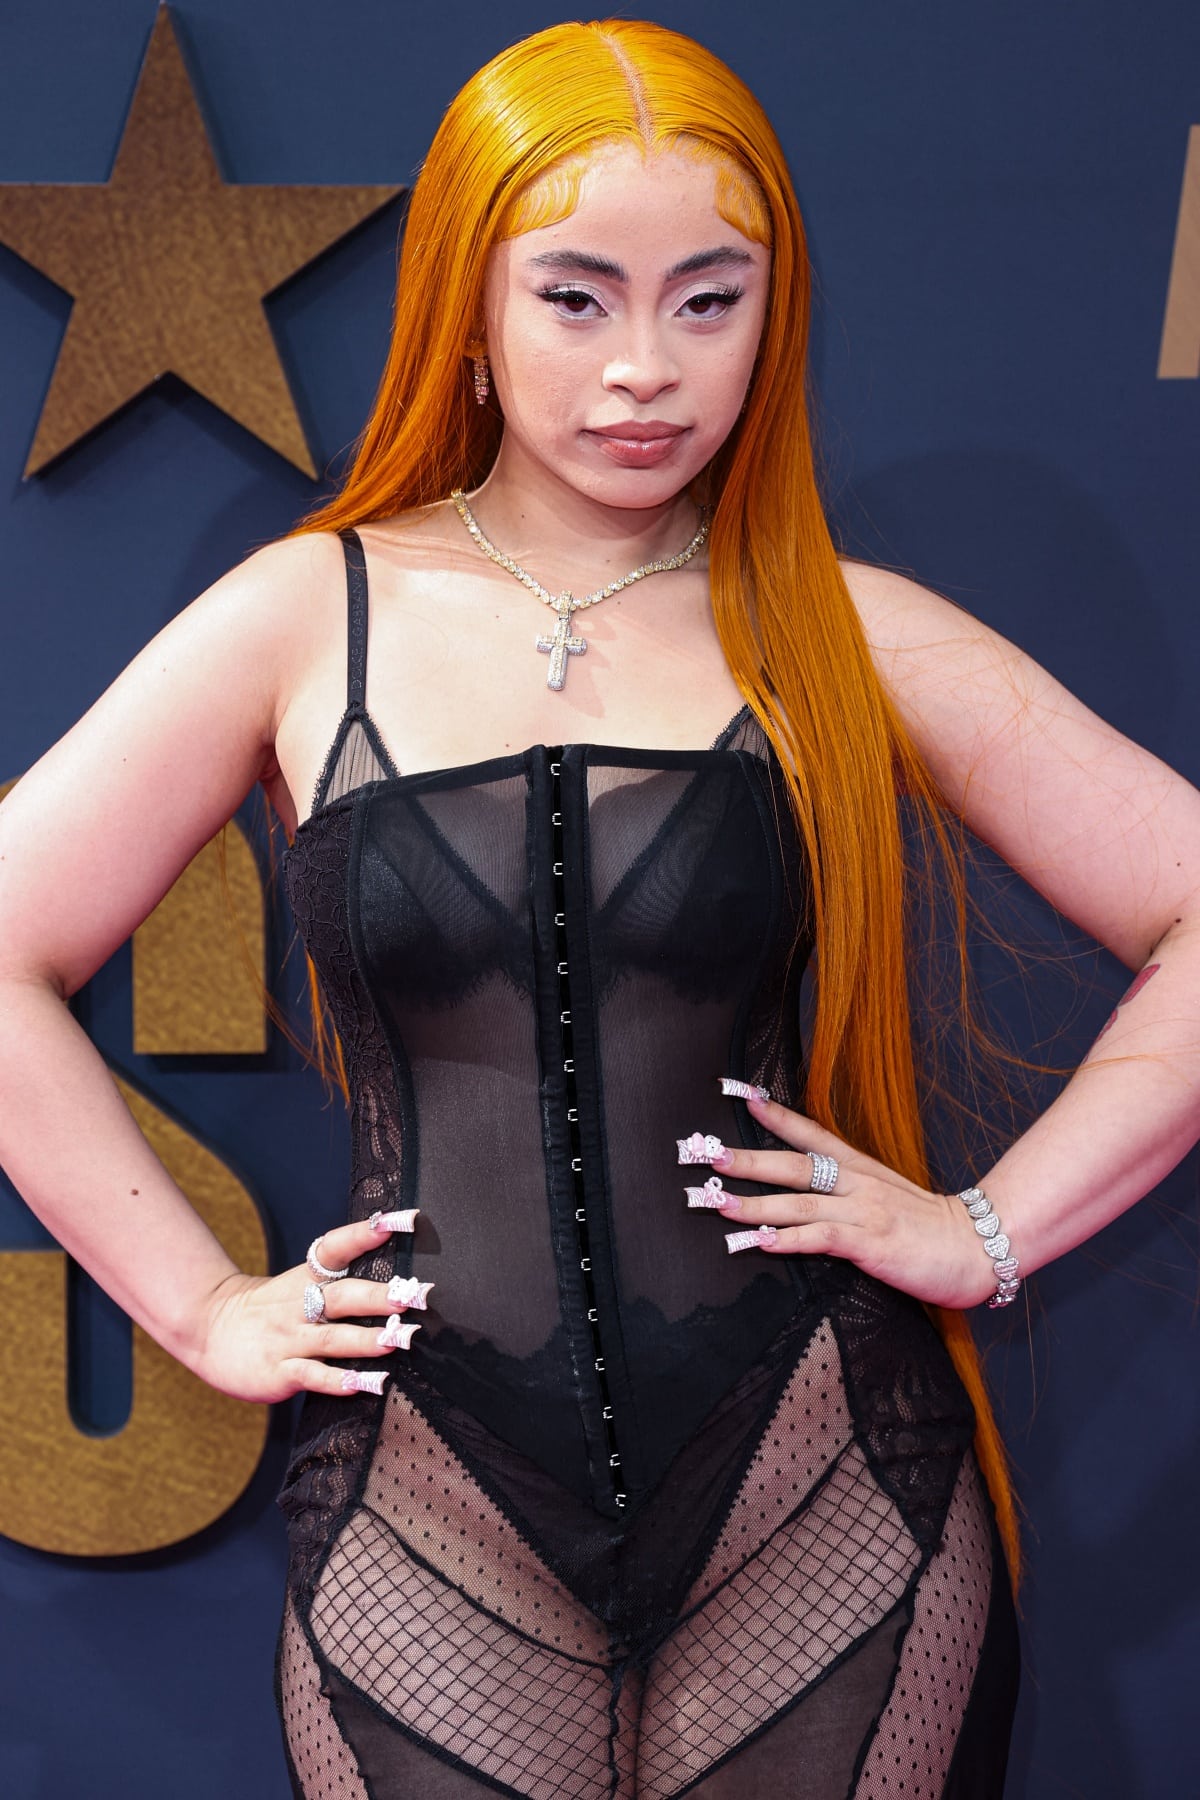 Ice Spice making a bold statement in Dolce & Gabbana on the red carpet at the 2023 BET Awards